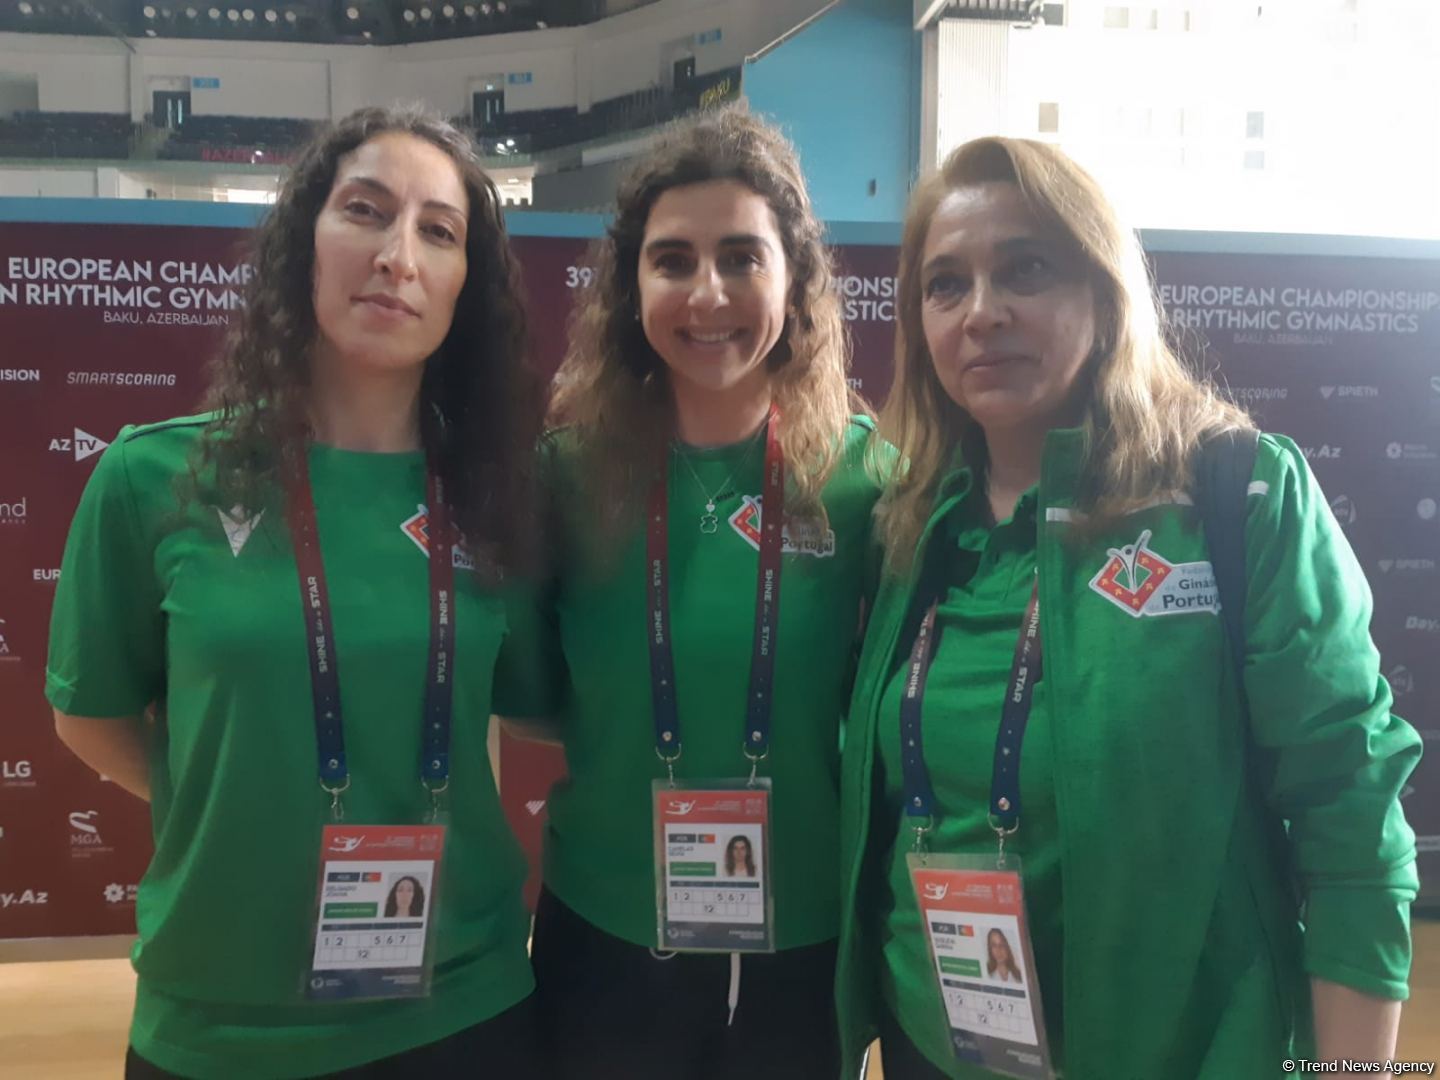 Azerbaijan Gymnastics Federation conducts competitions flawlessly – Portuguese coach